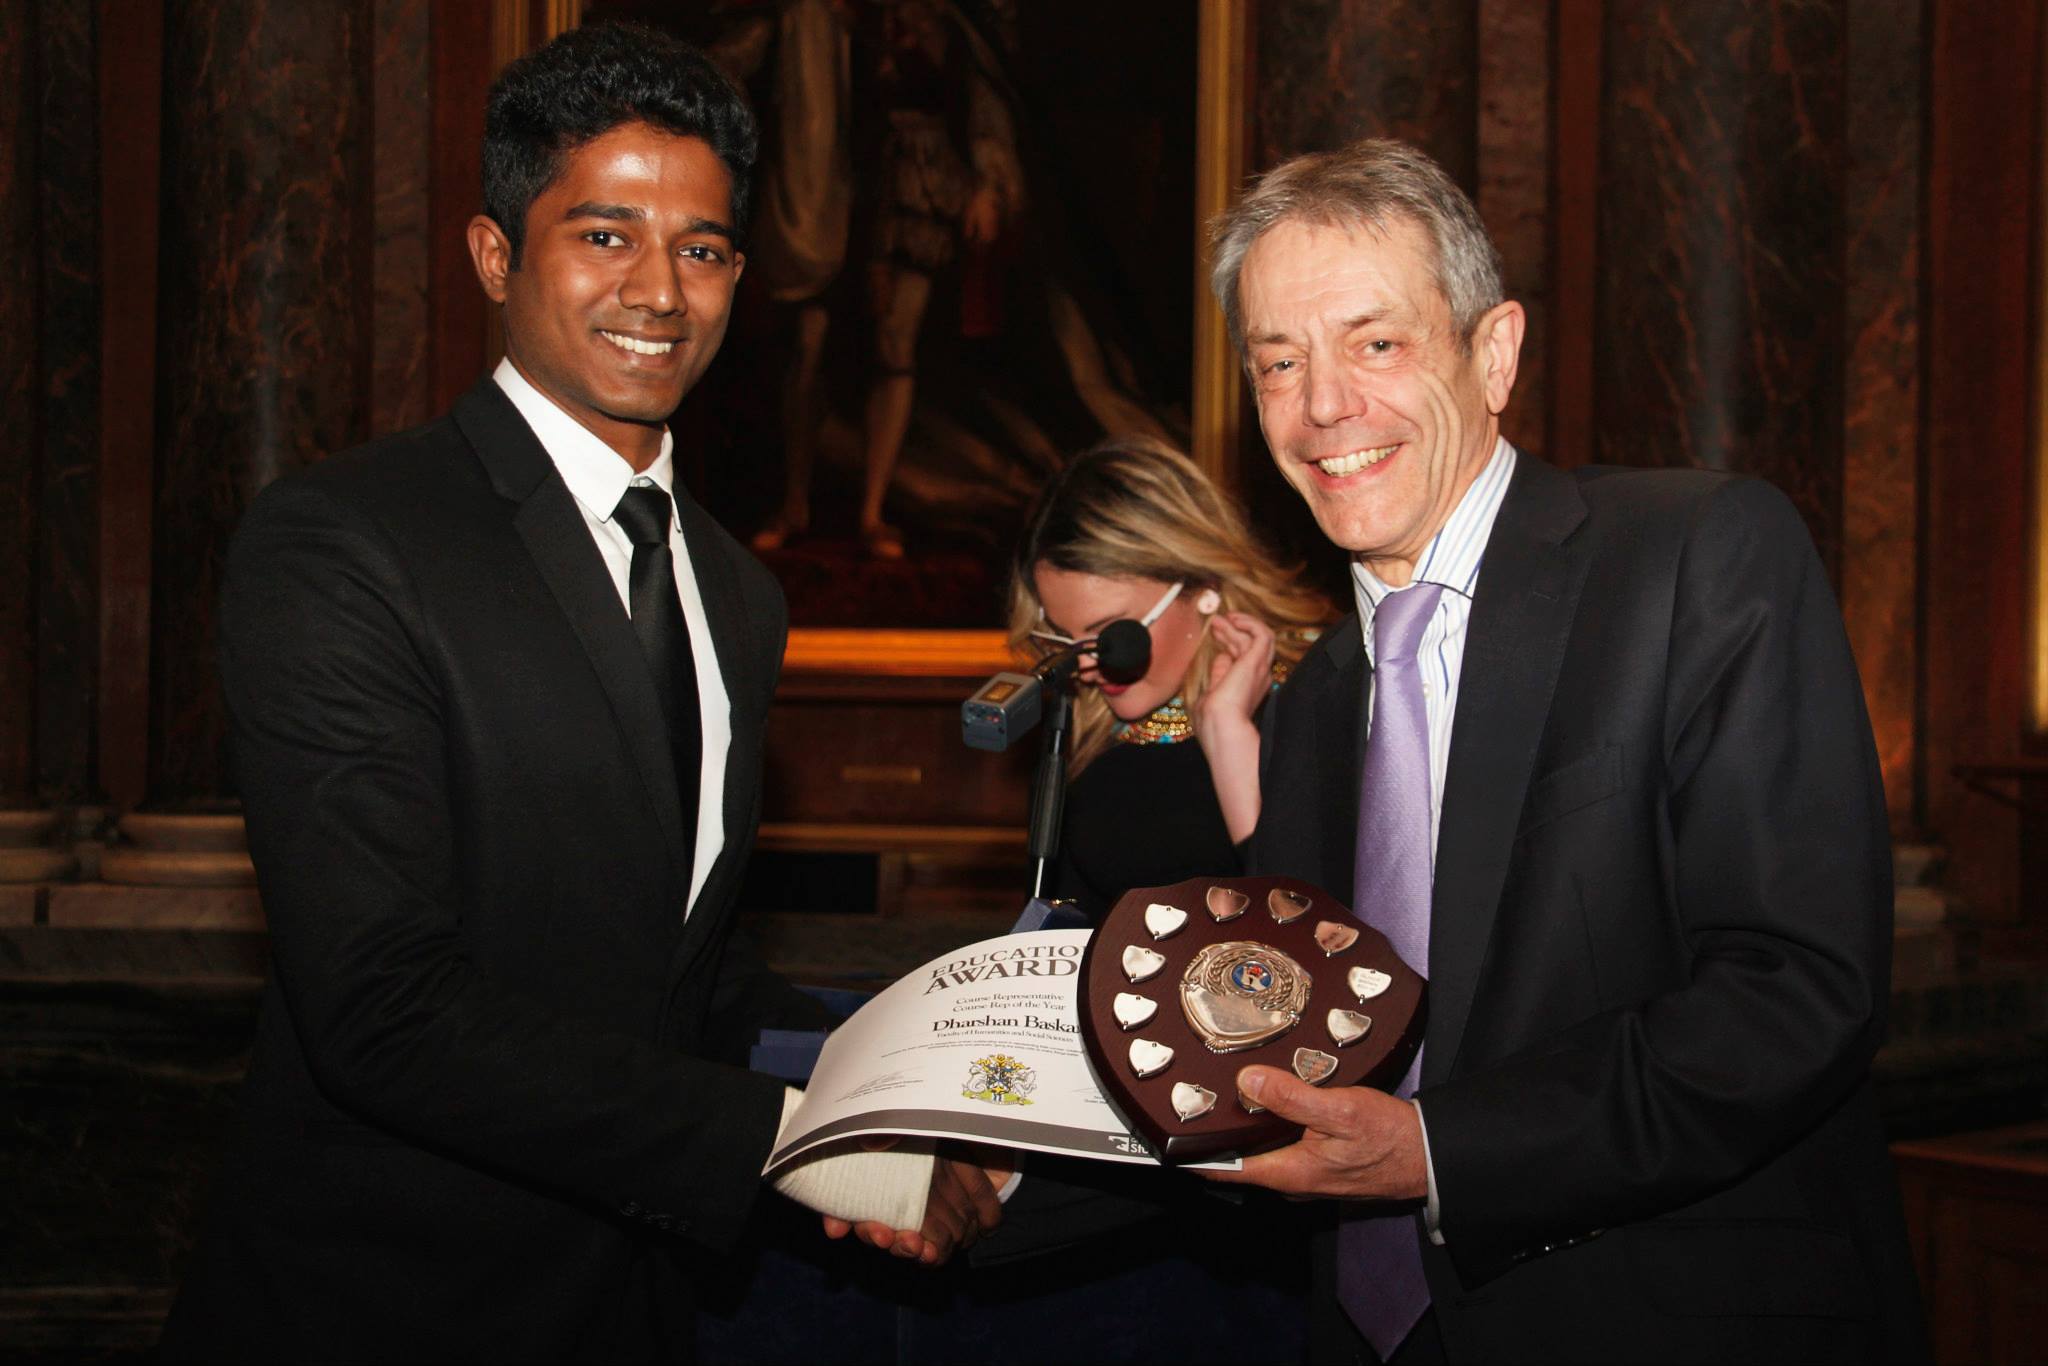 Dharshan (left) Prof. Simon Gaskell, Principal of Queen Mary, University of London.